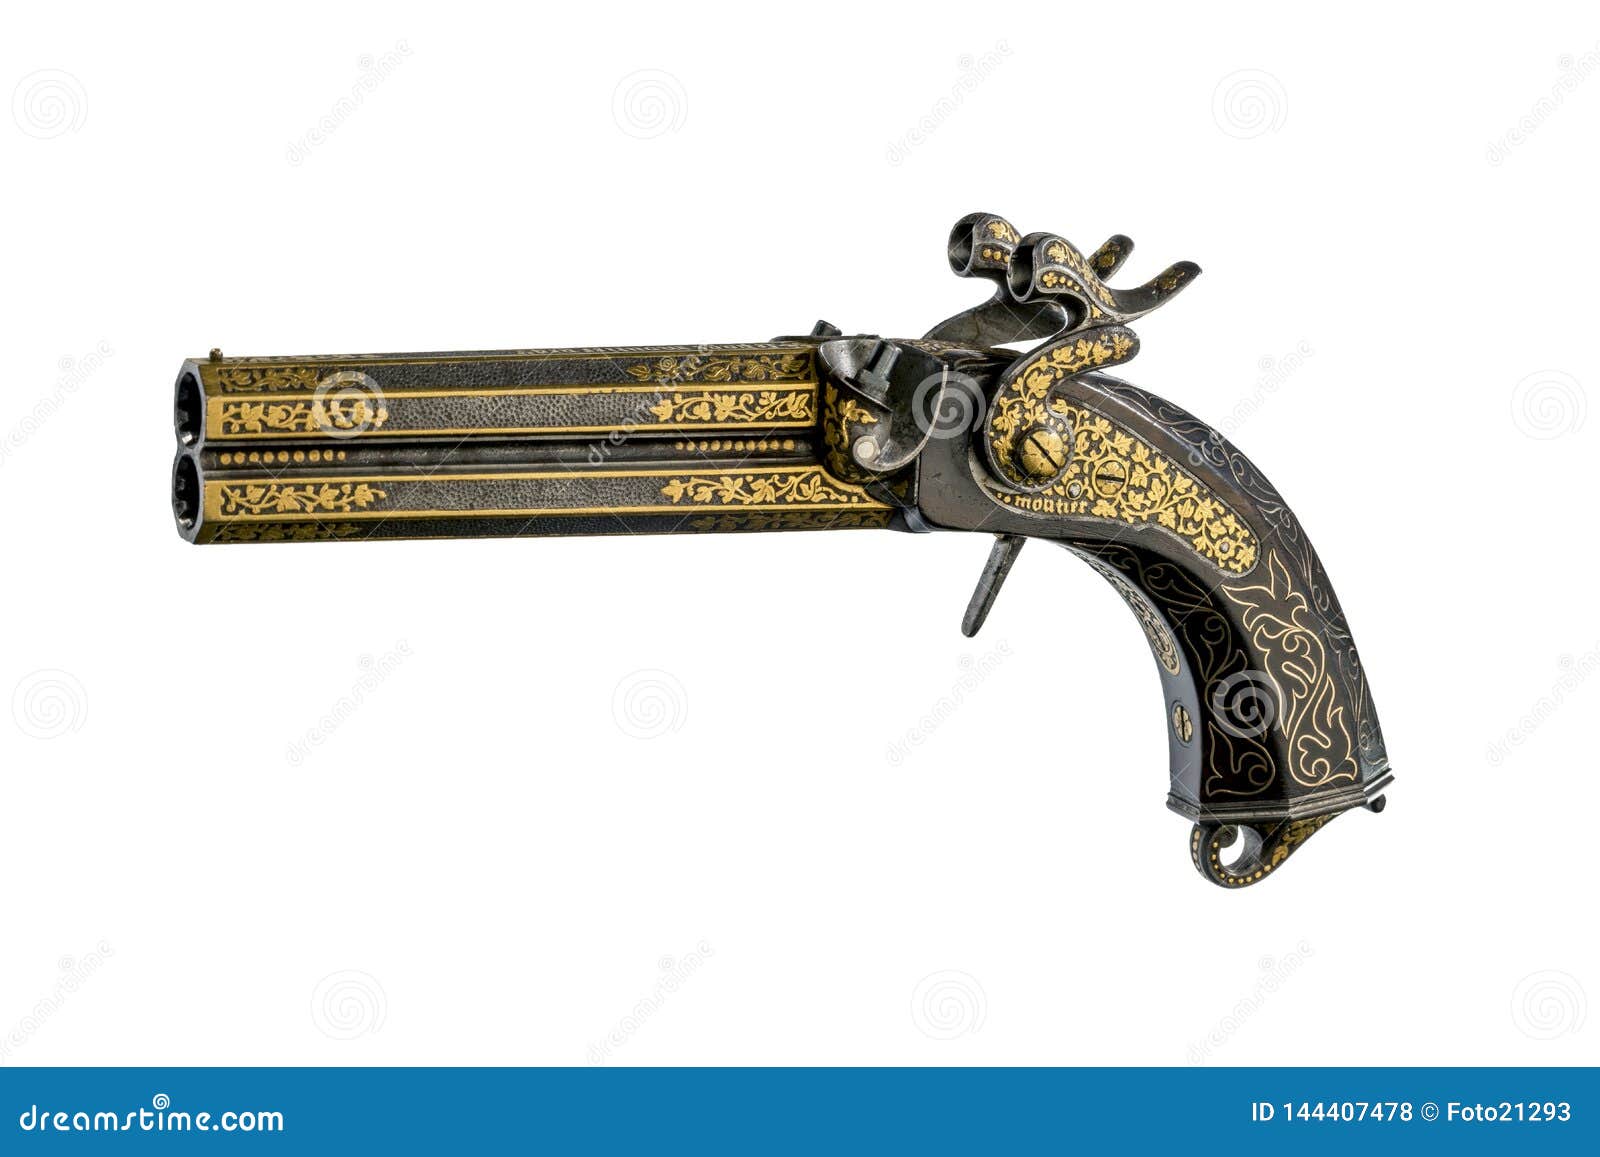 vintage pistol with engraving and carving